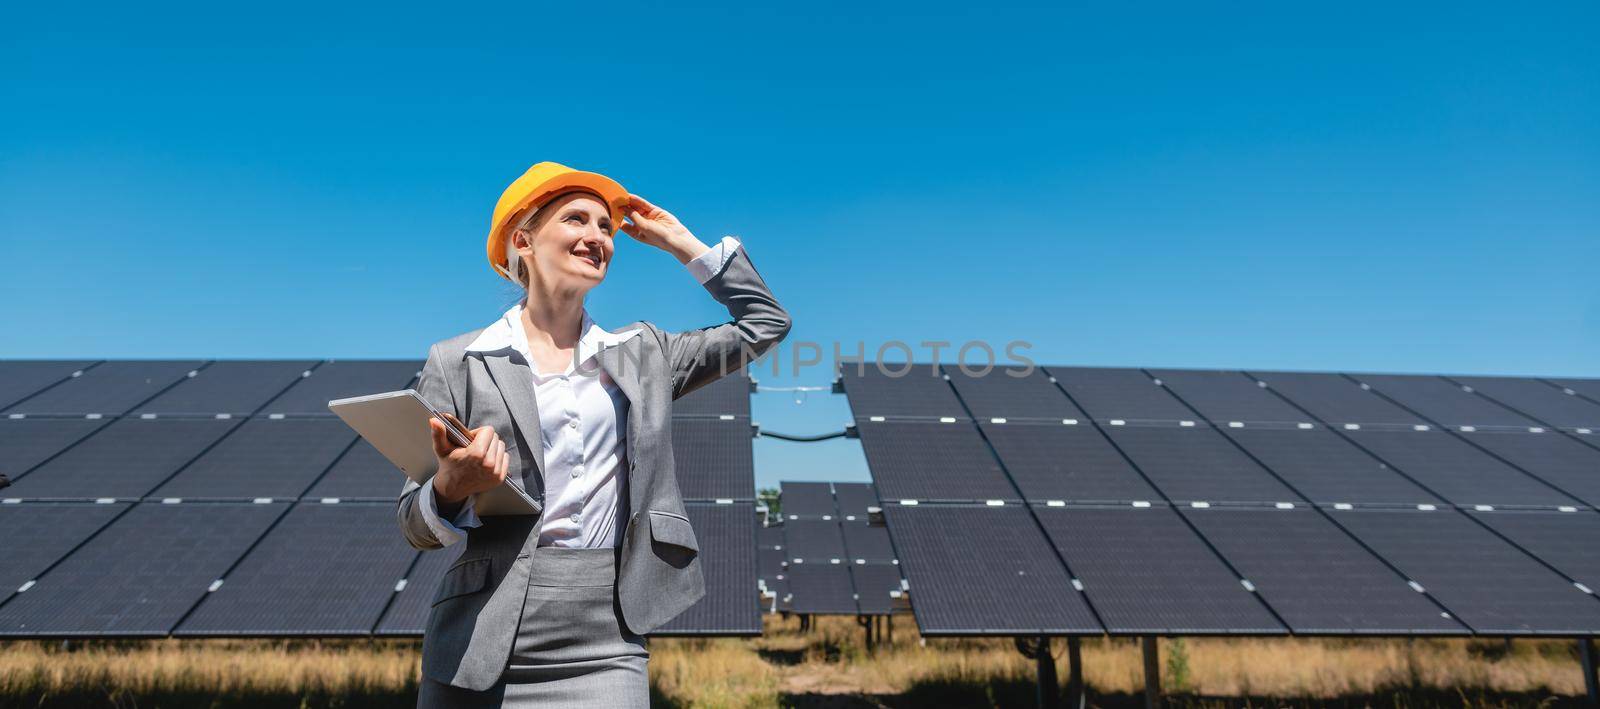 Businesswoman or investor inspecting her solar farm standing in front of photovoltaic panels